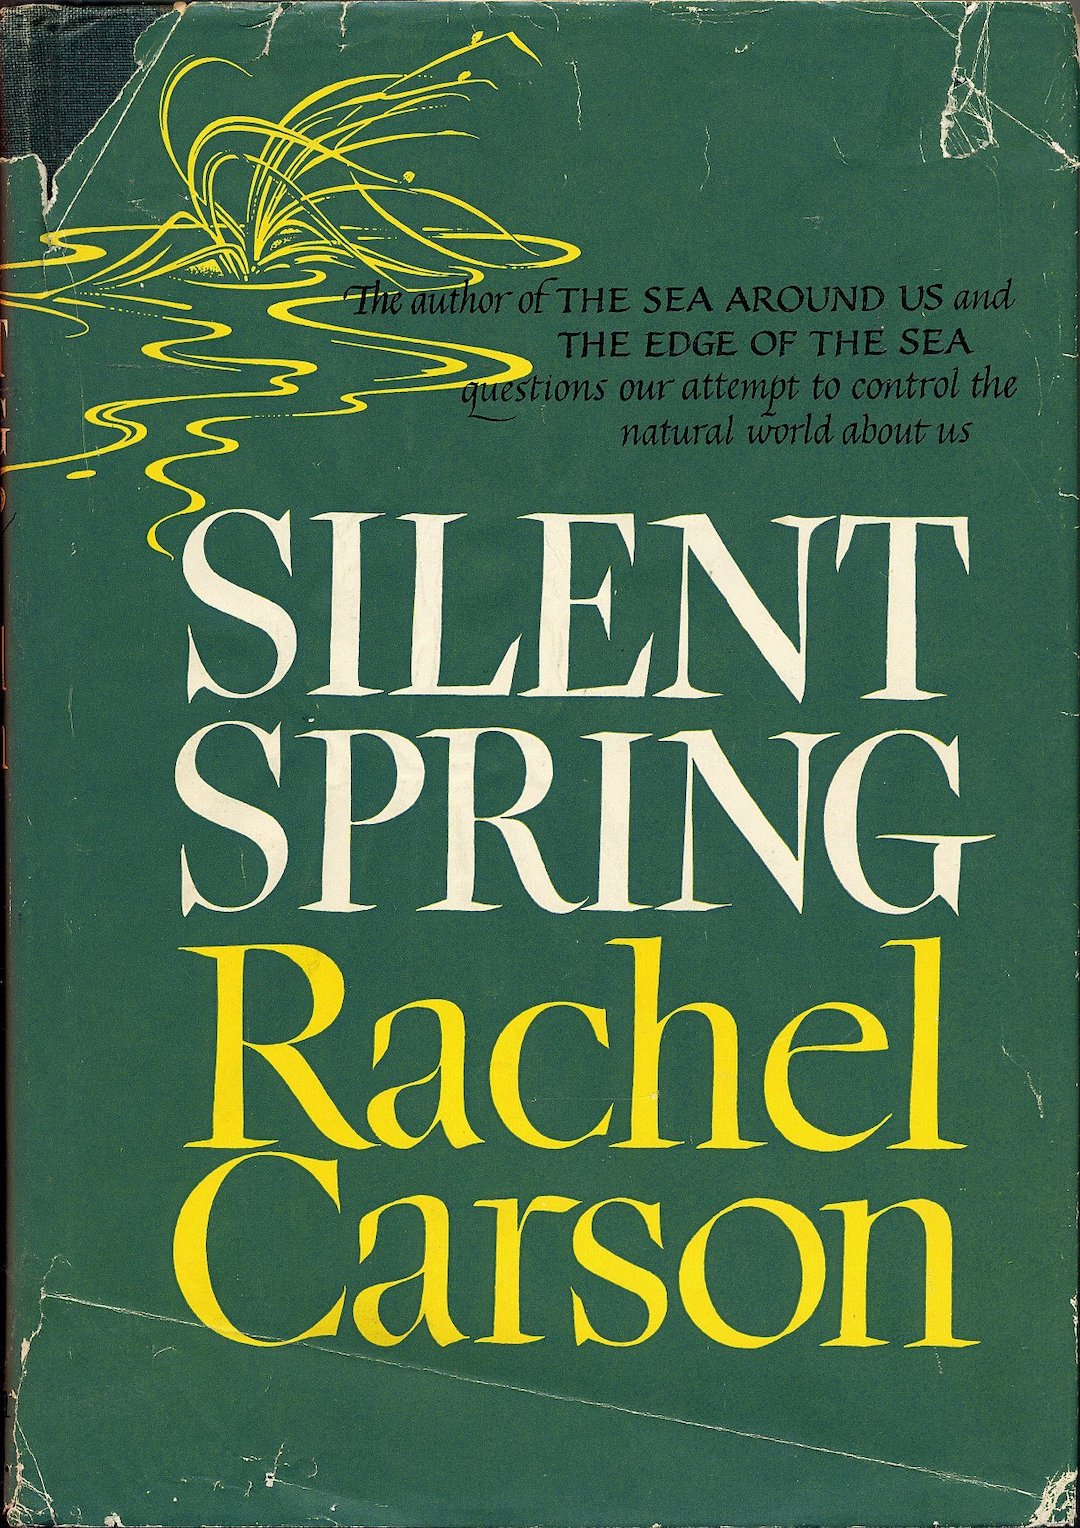 Silent Spring by Rachel Carson (1962) front cover.